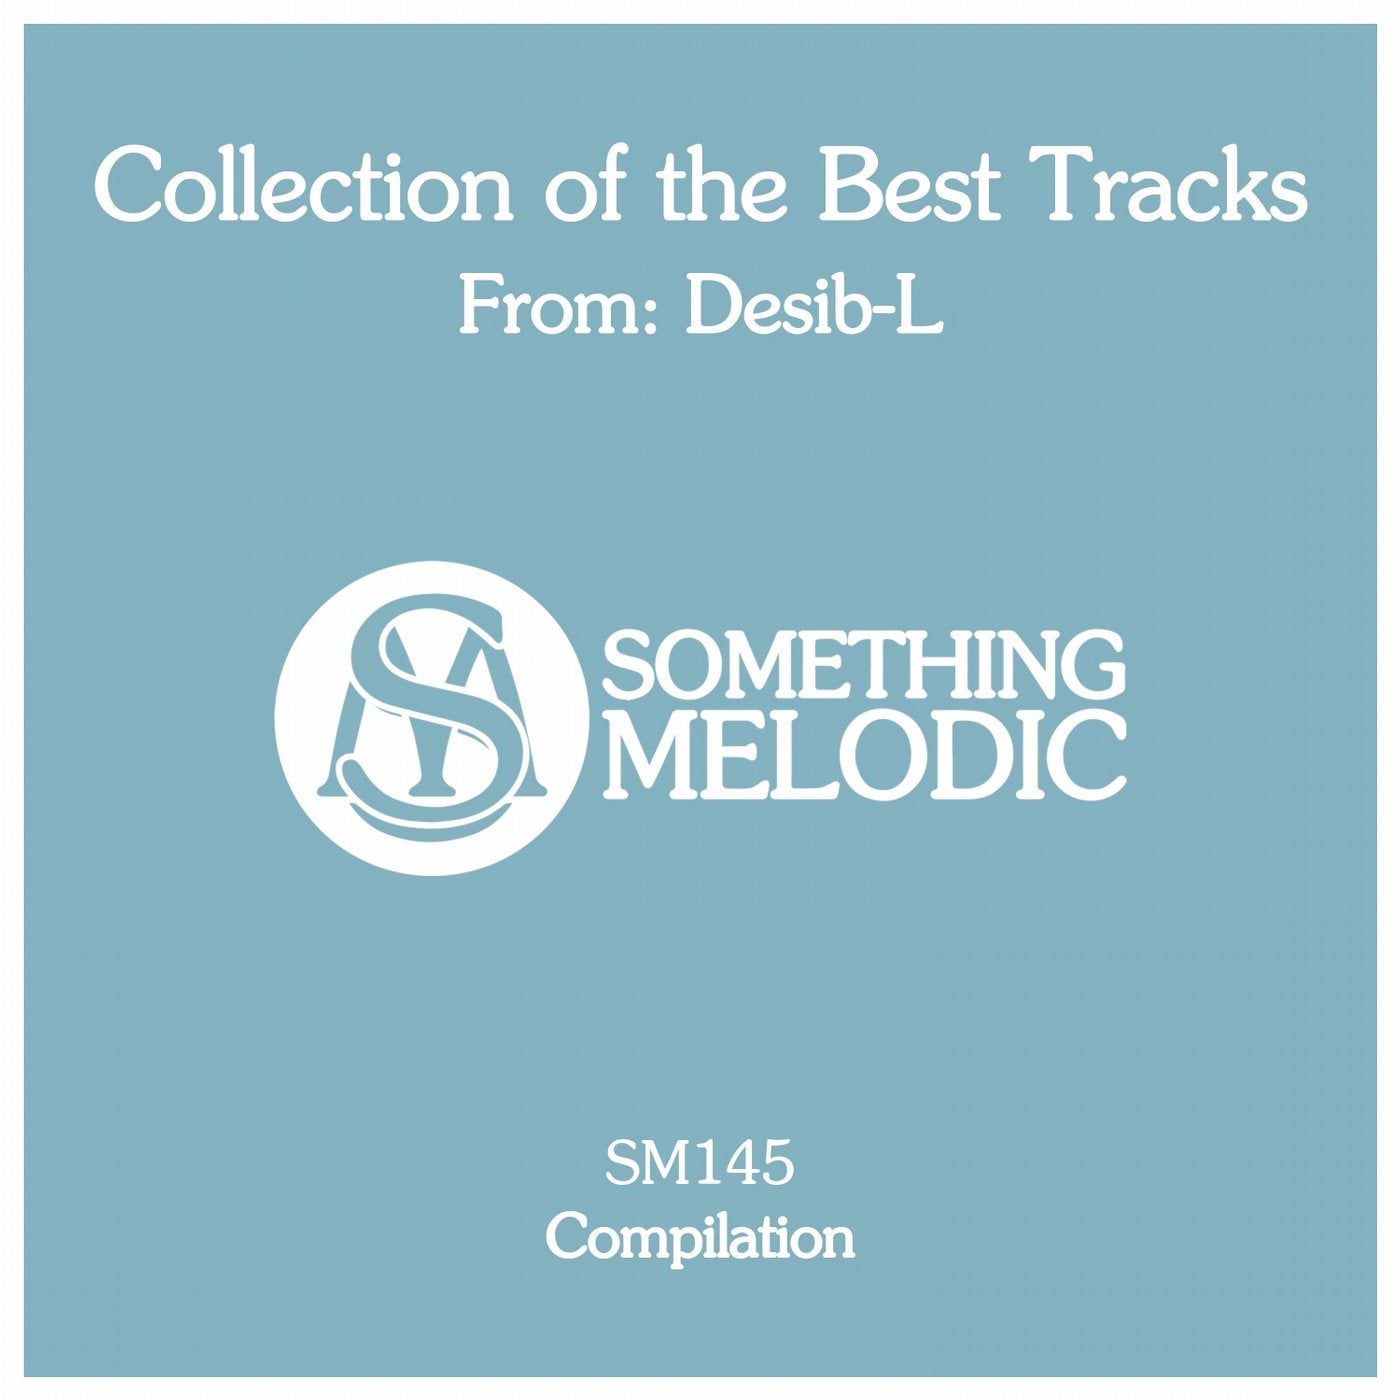 Collection of the Best Tracks From: Desib-L